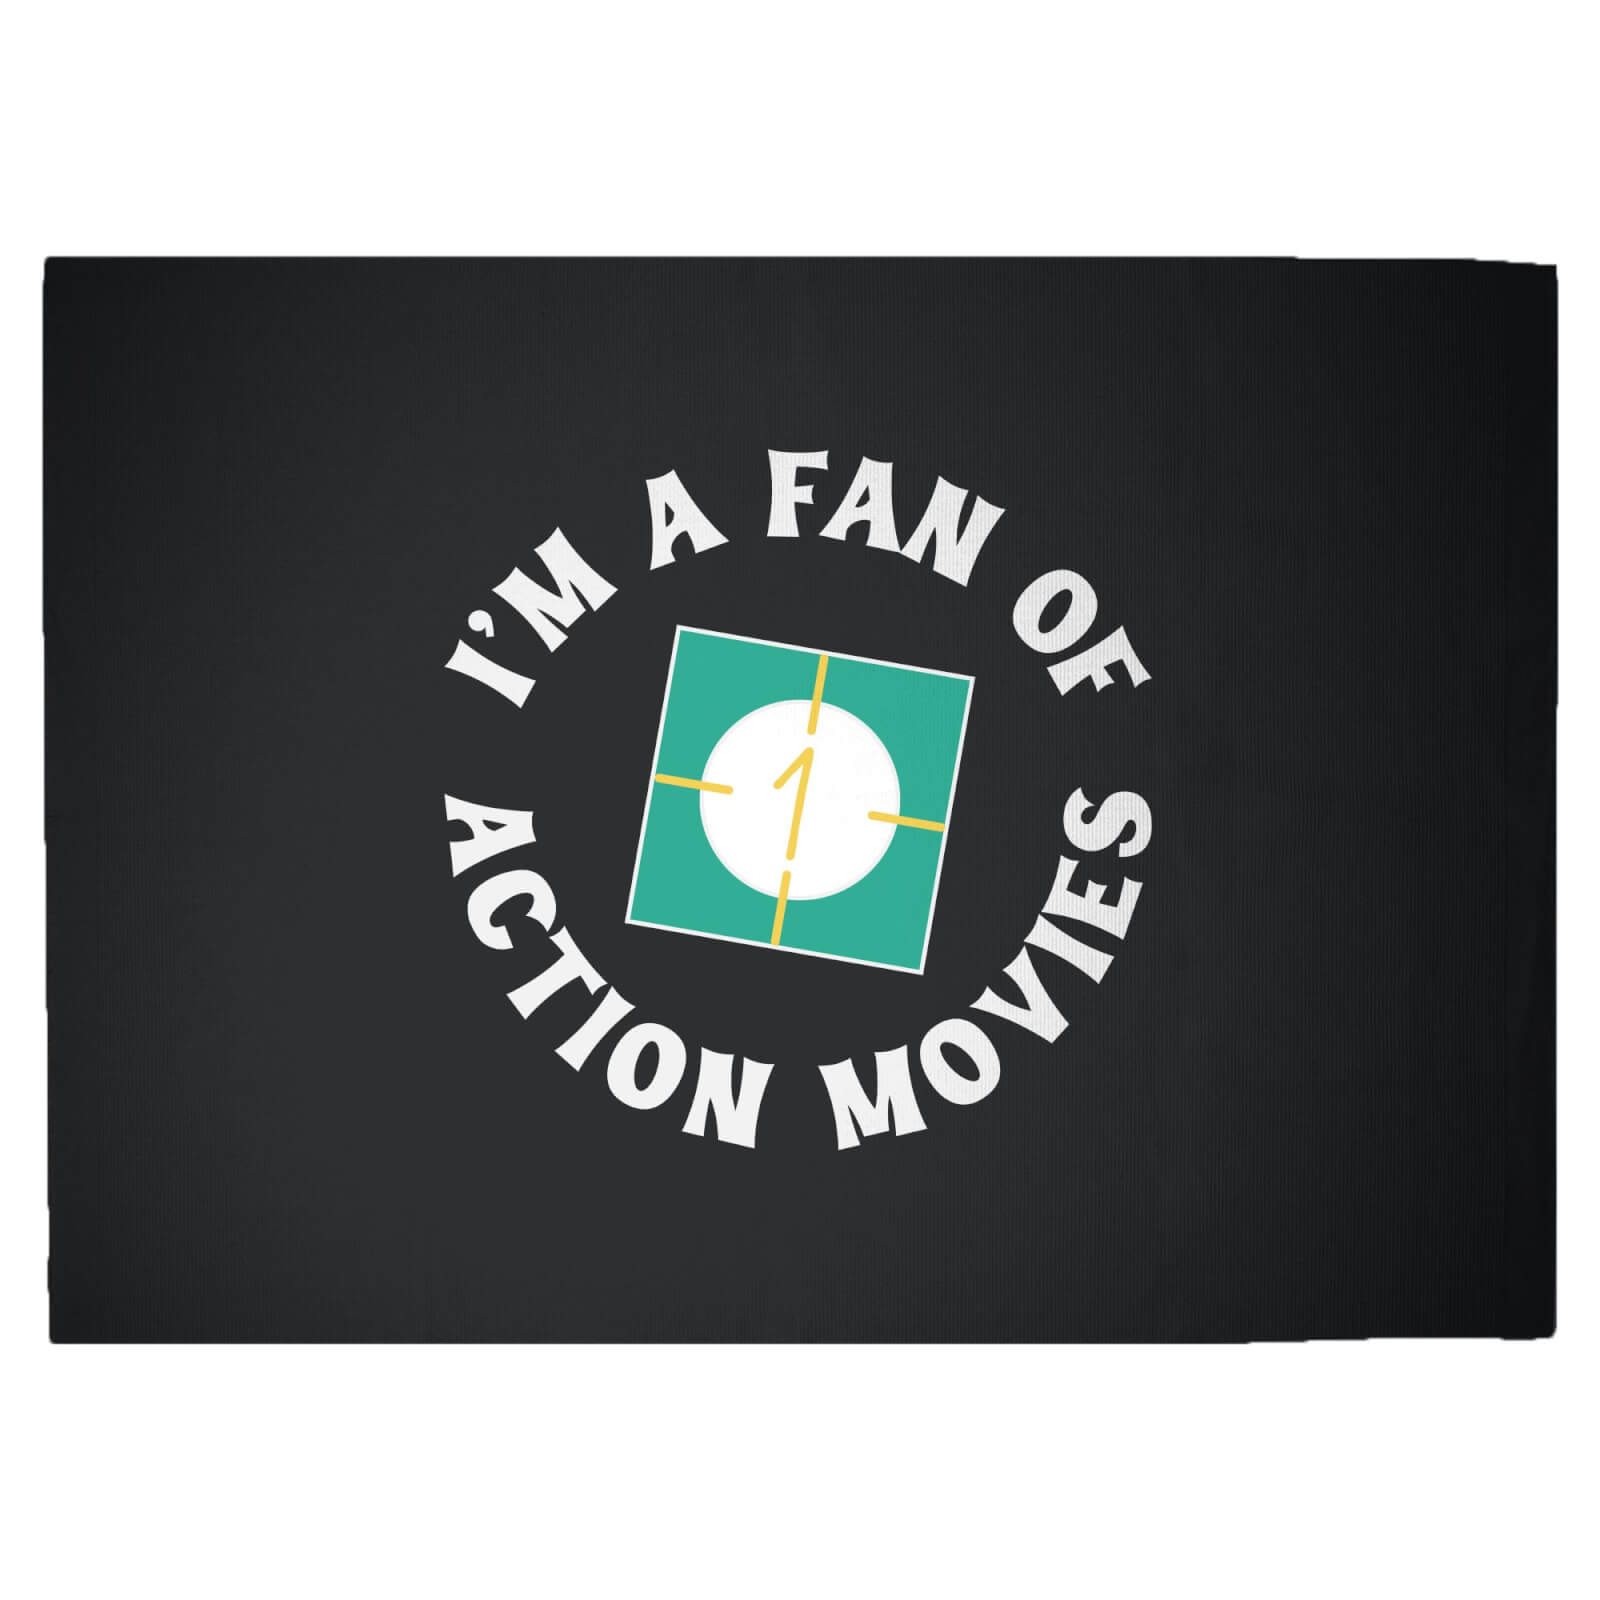 I'm A Fan Of Action Movies Woven Rug - Large